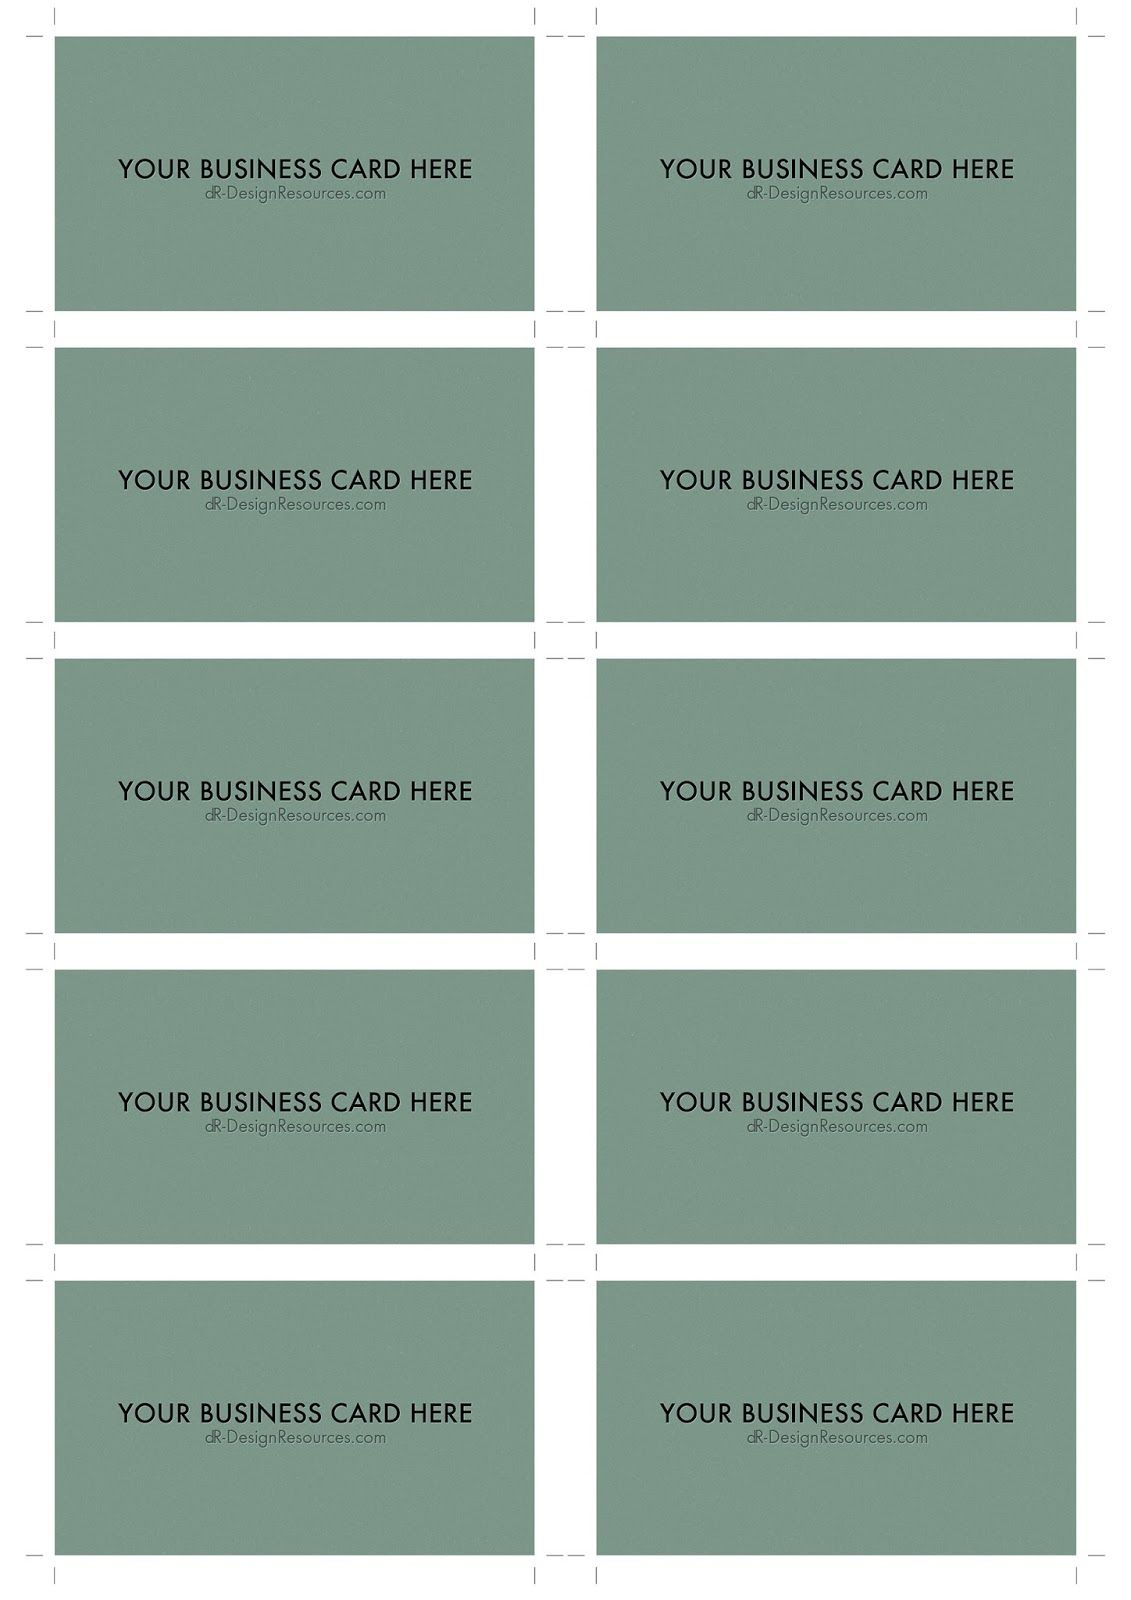 A4 Business Card Template Psd (10 Per Sheet) | Business Card With Regard To Visiting Card Templates For Photoshop